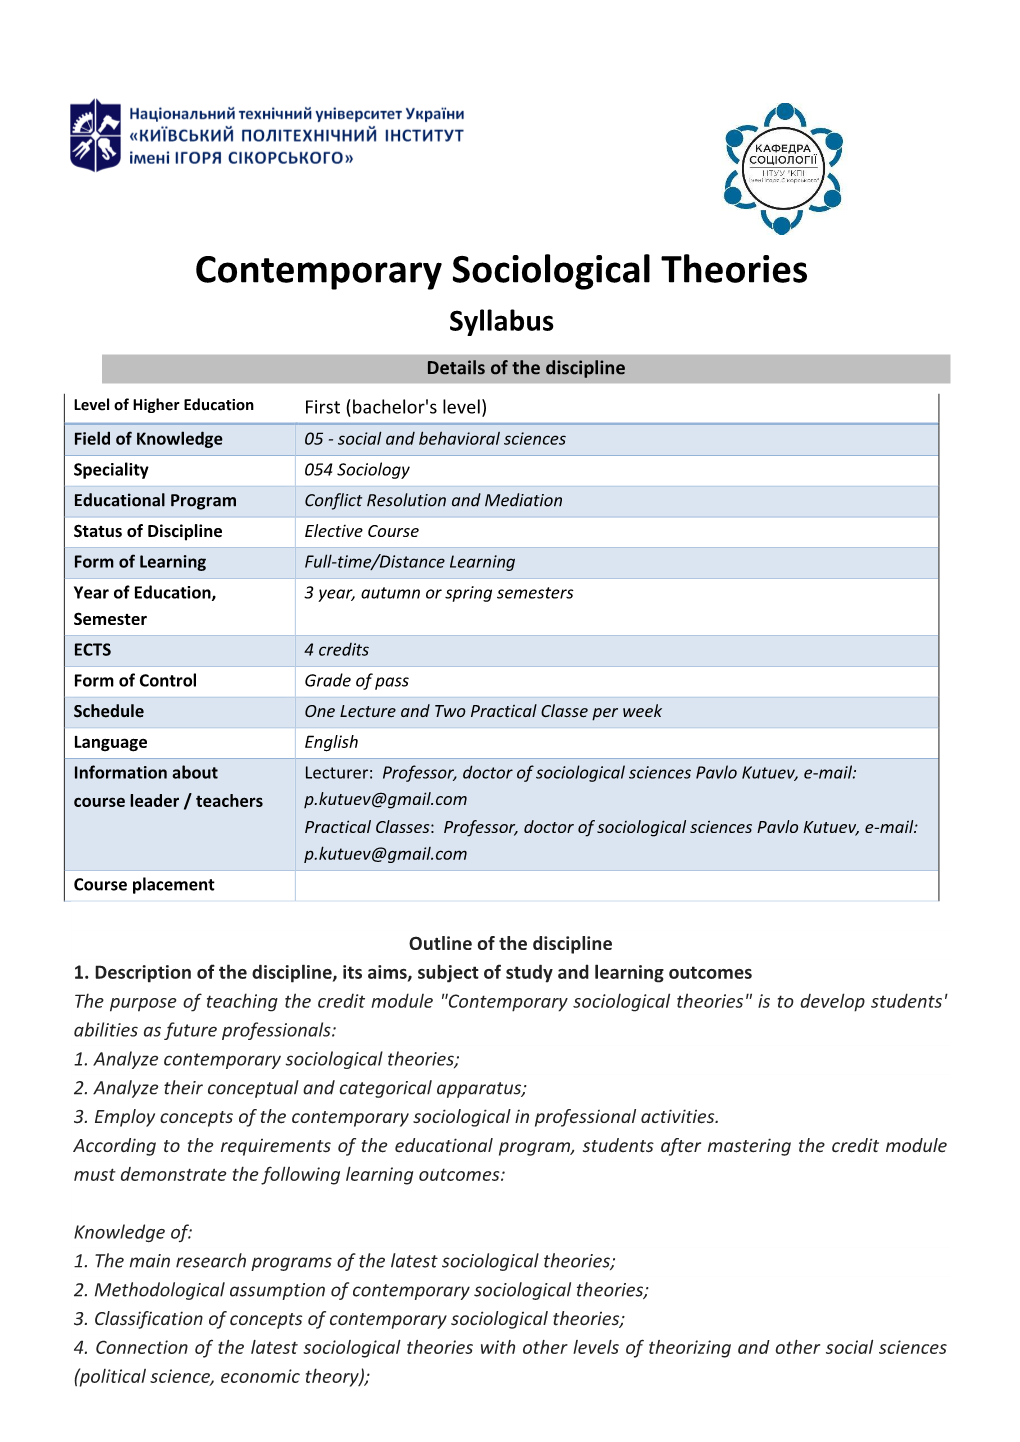 Contemporary Sociological Theories Syllabus Details of the Discipline